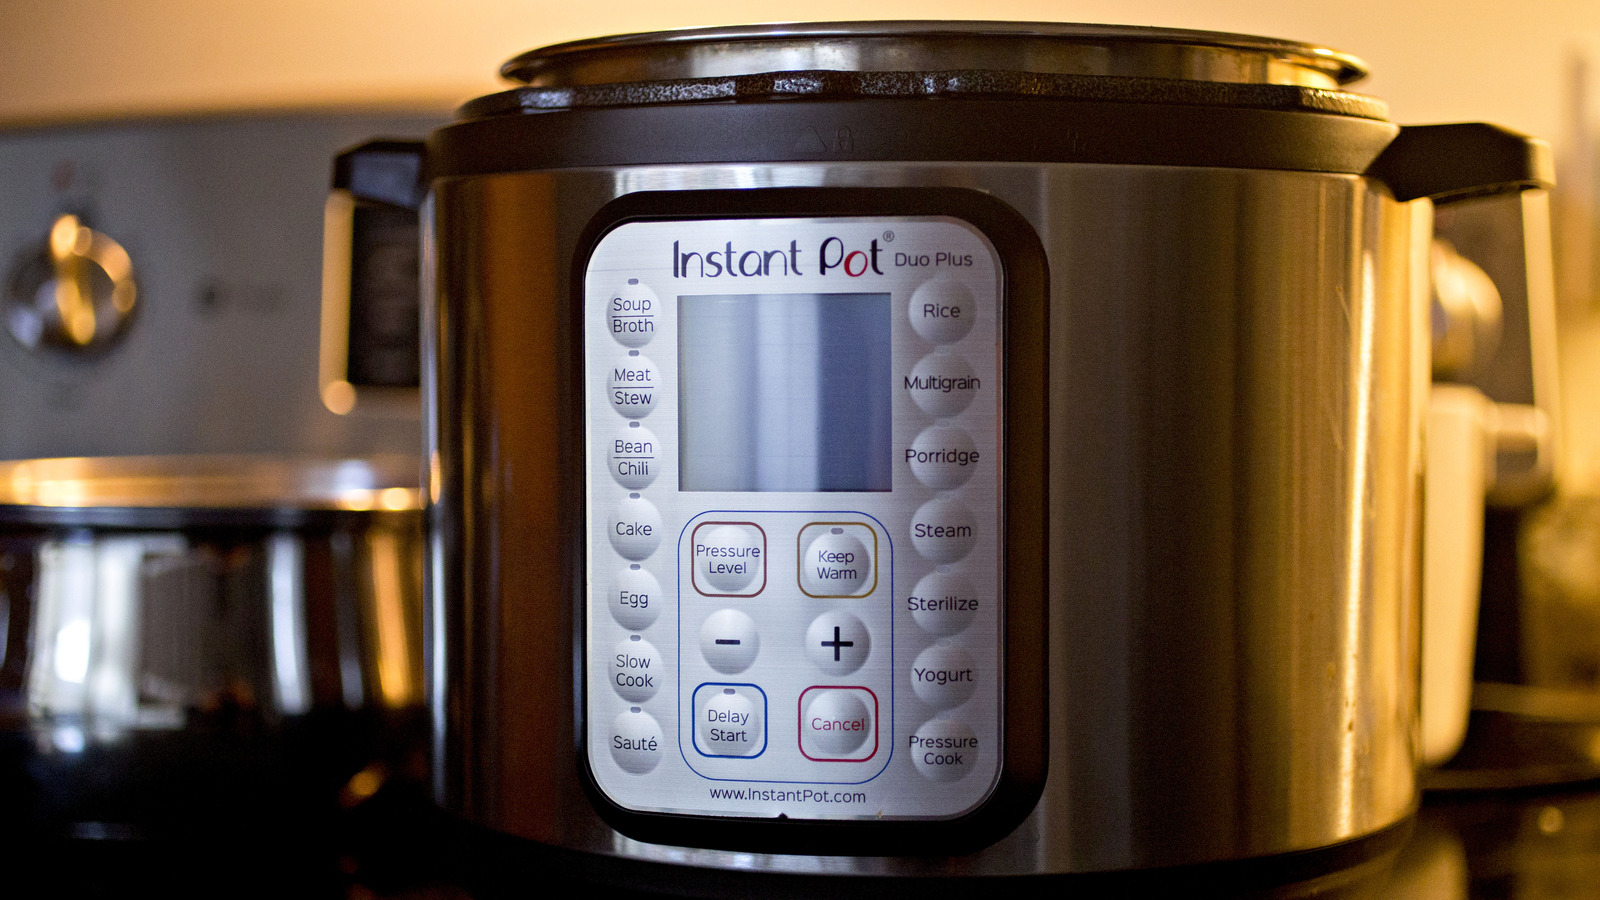 Does Instant Pot Duo Plus come with a vacuum sealer and food-safe